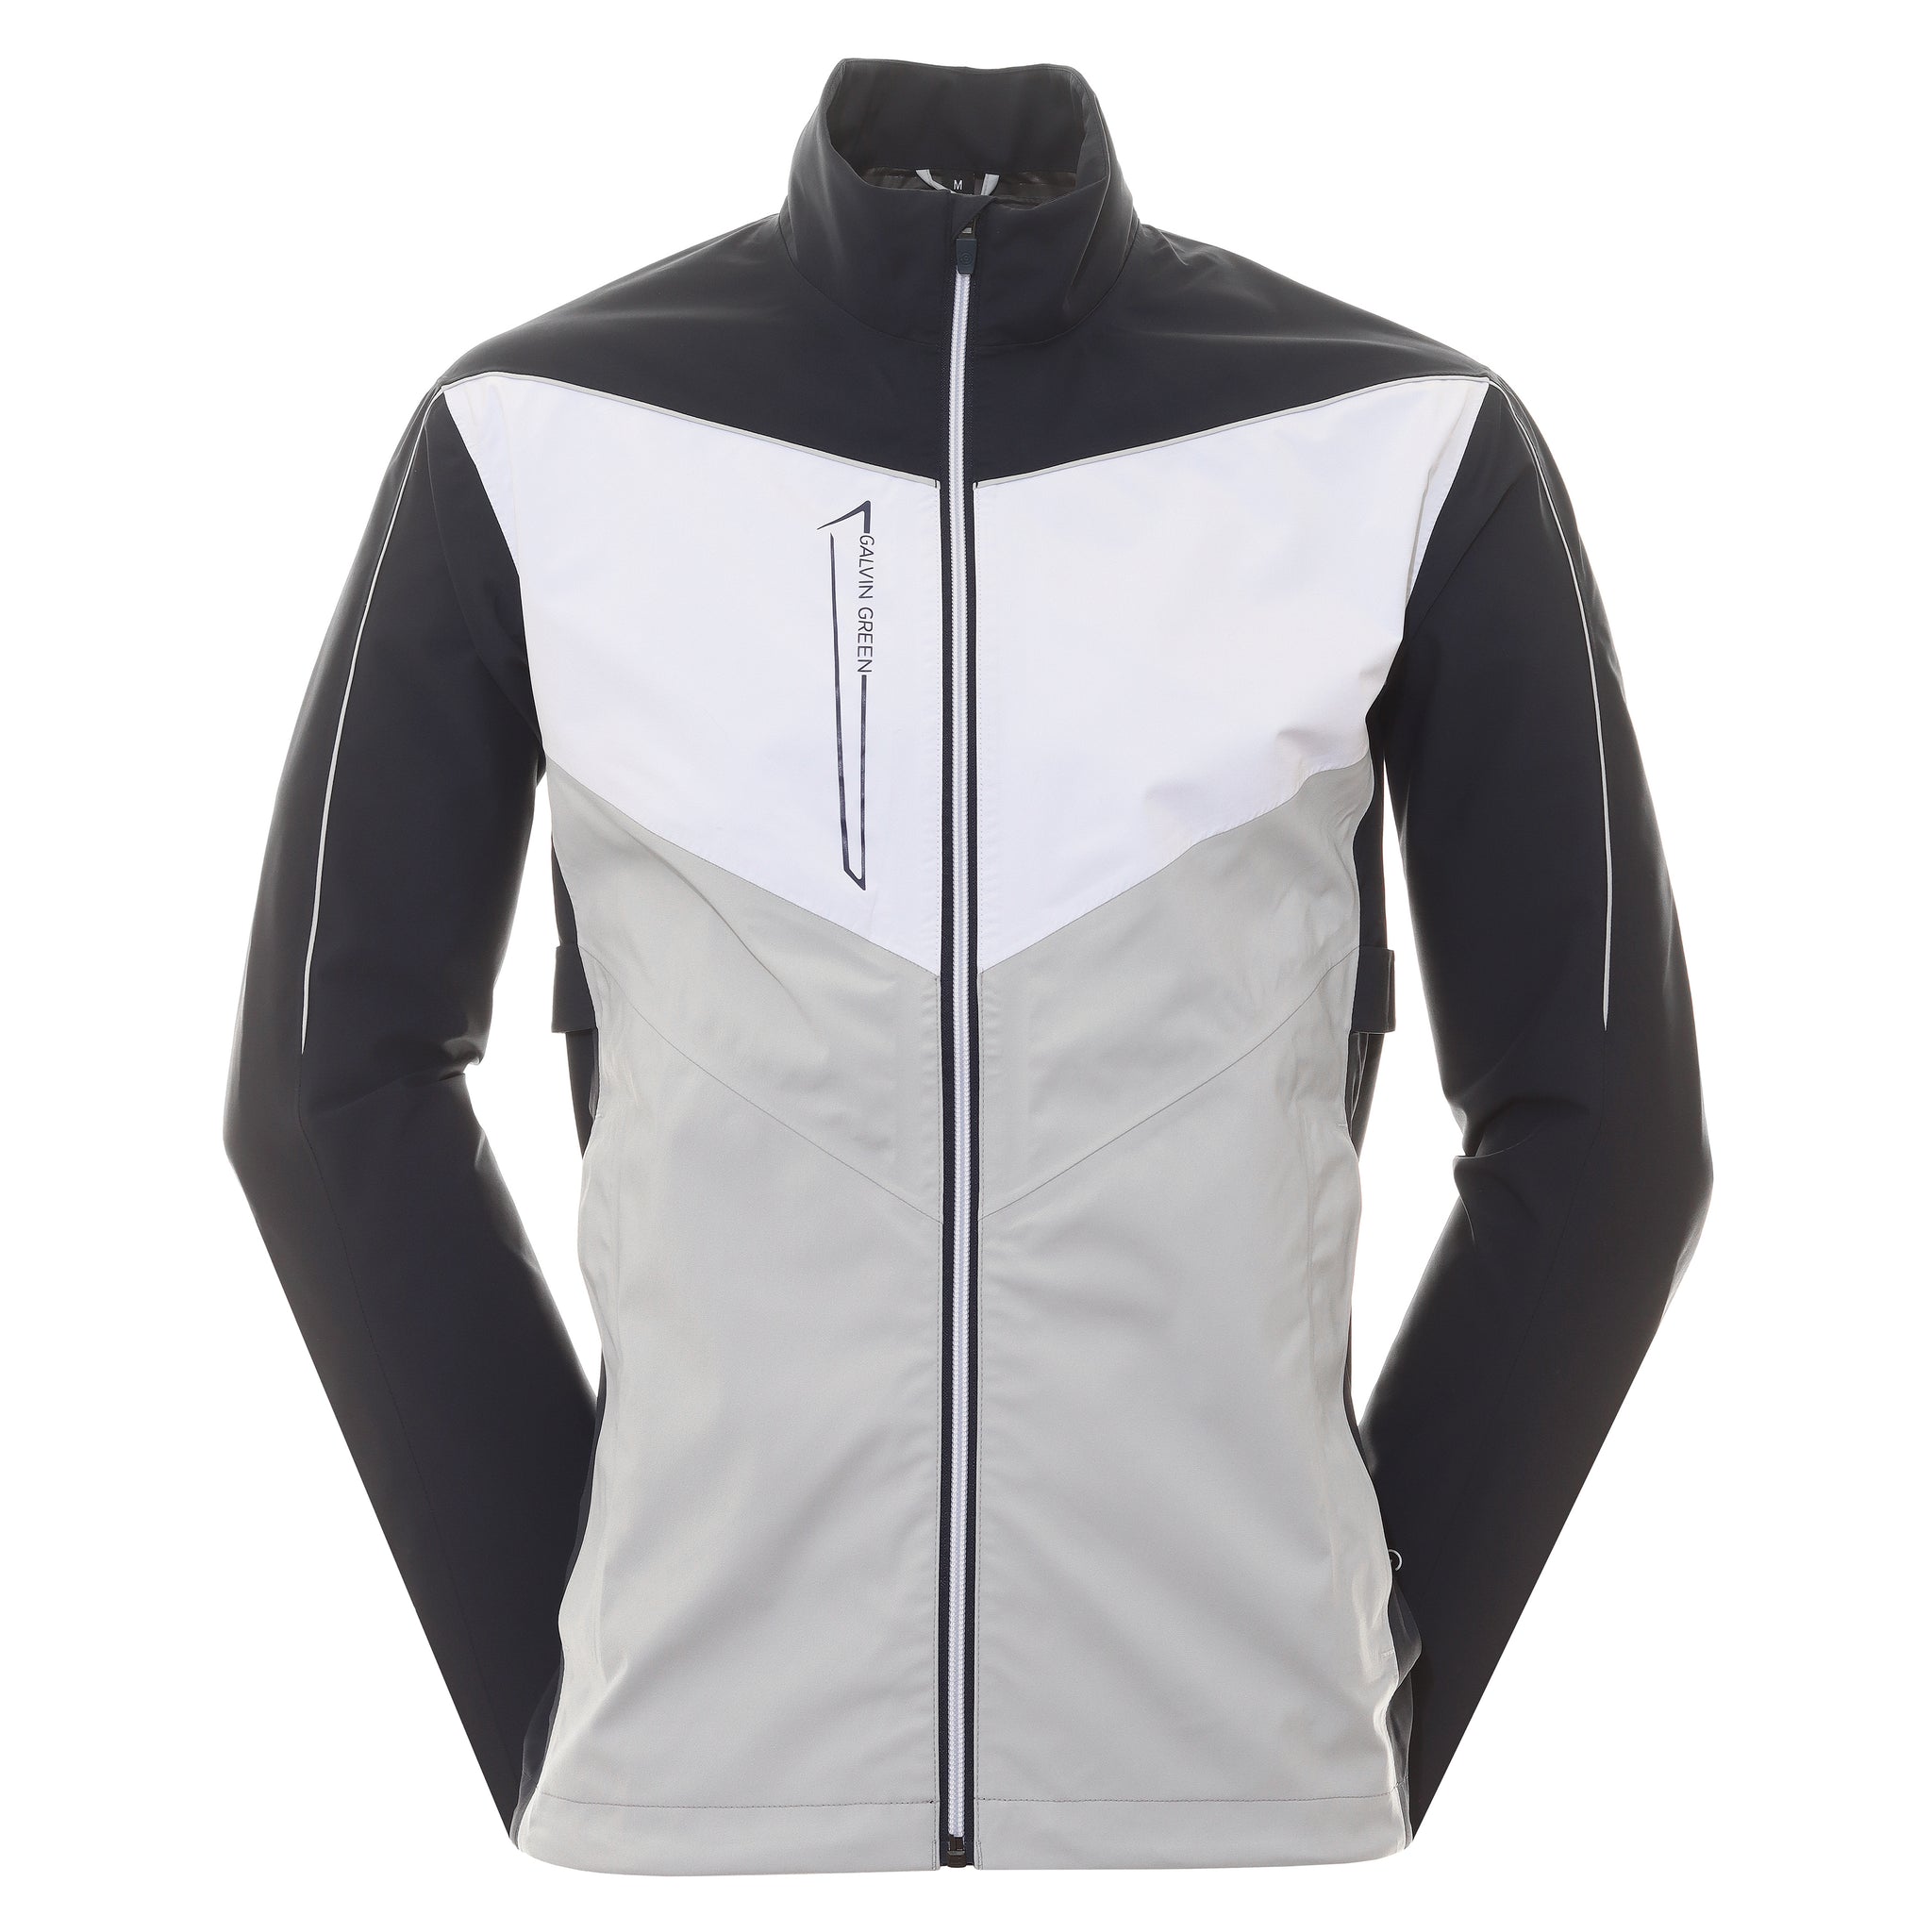 galvin-green-armstrong-paclite-gore-tex-waterproof-golf-jacket-navy-cool-grey-white-9367